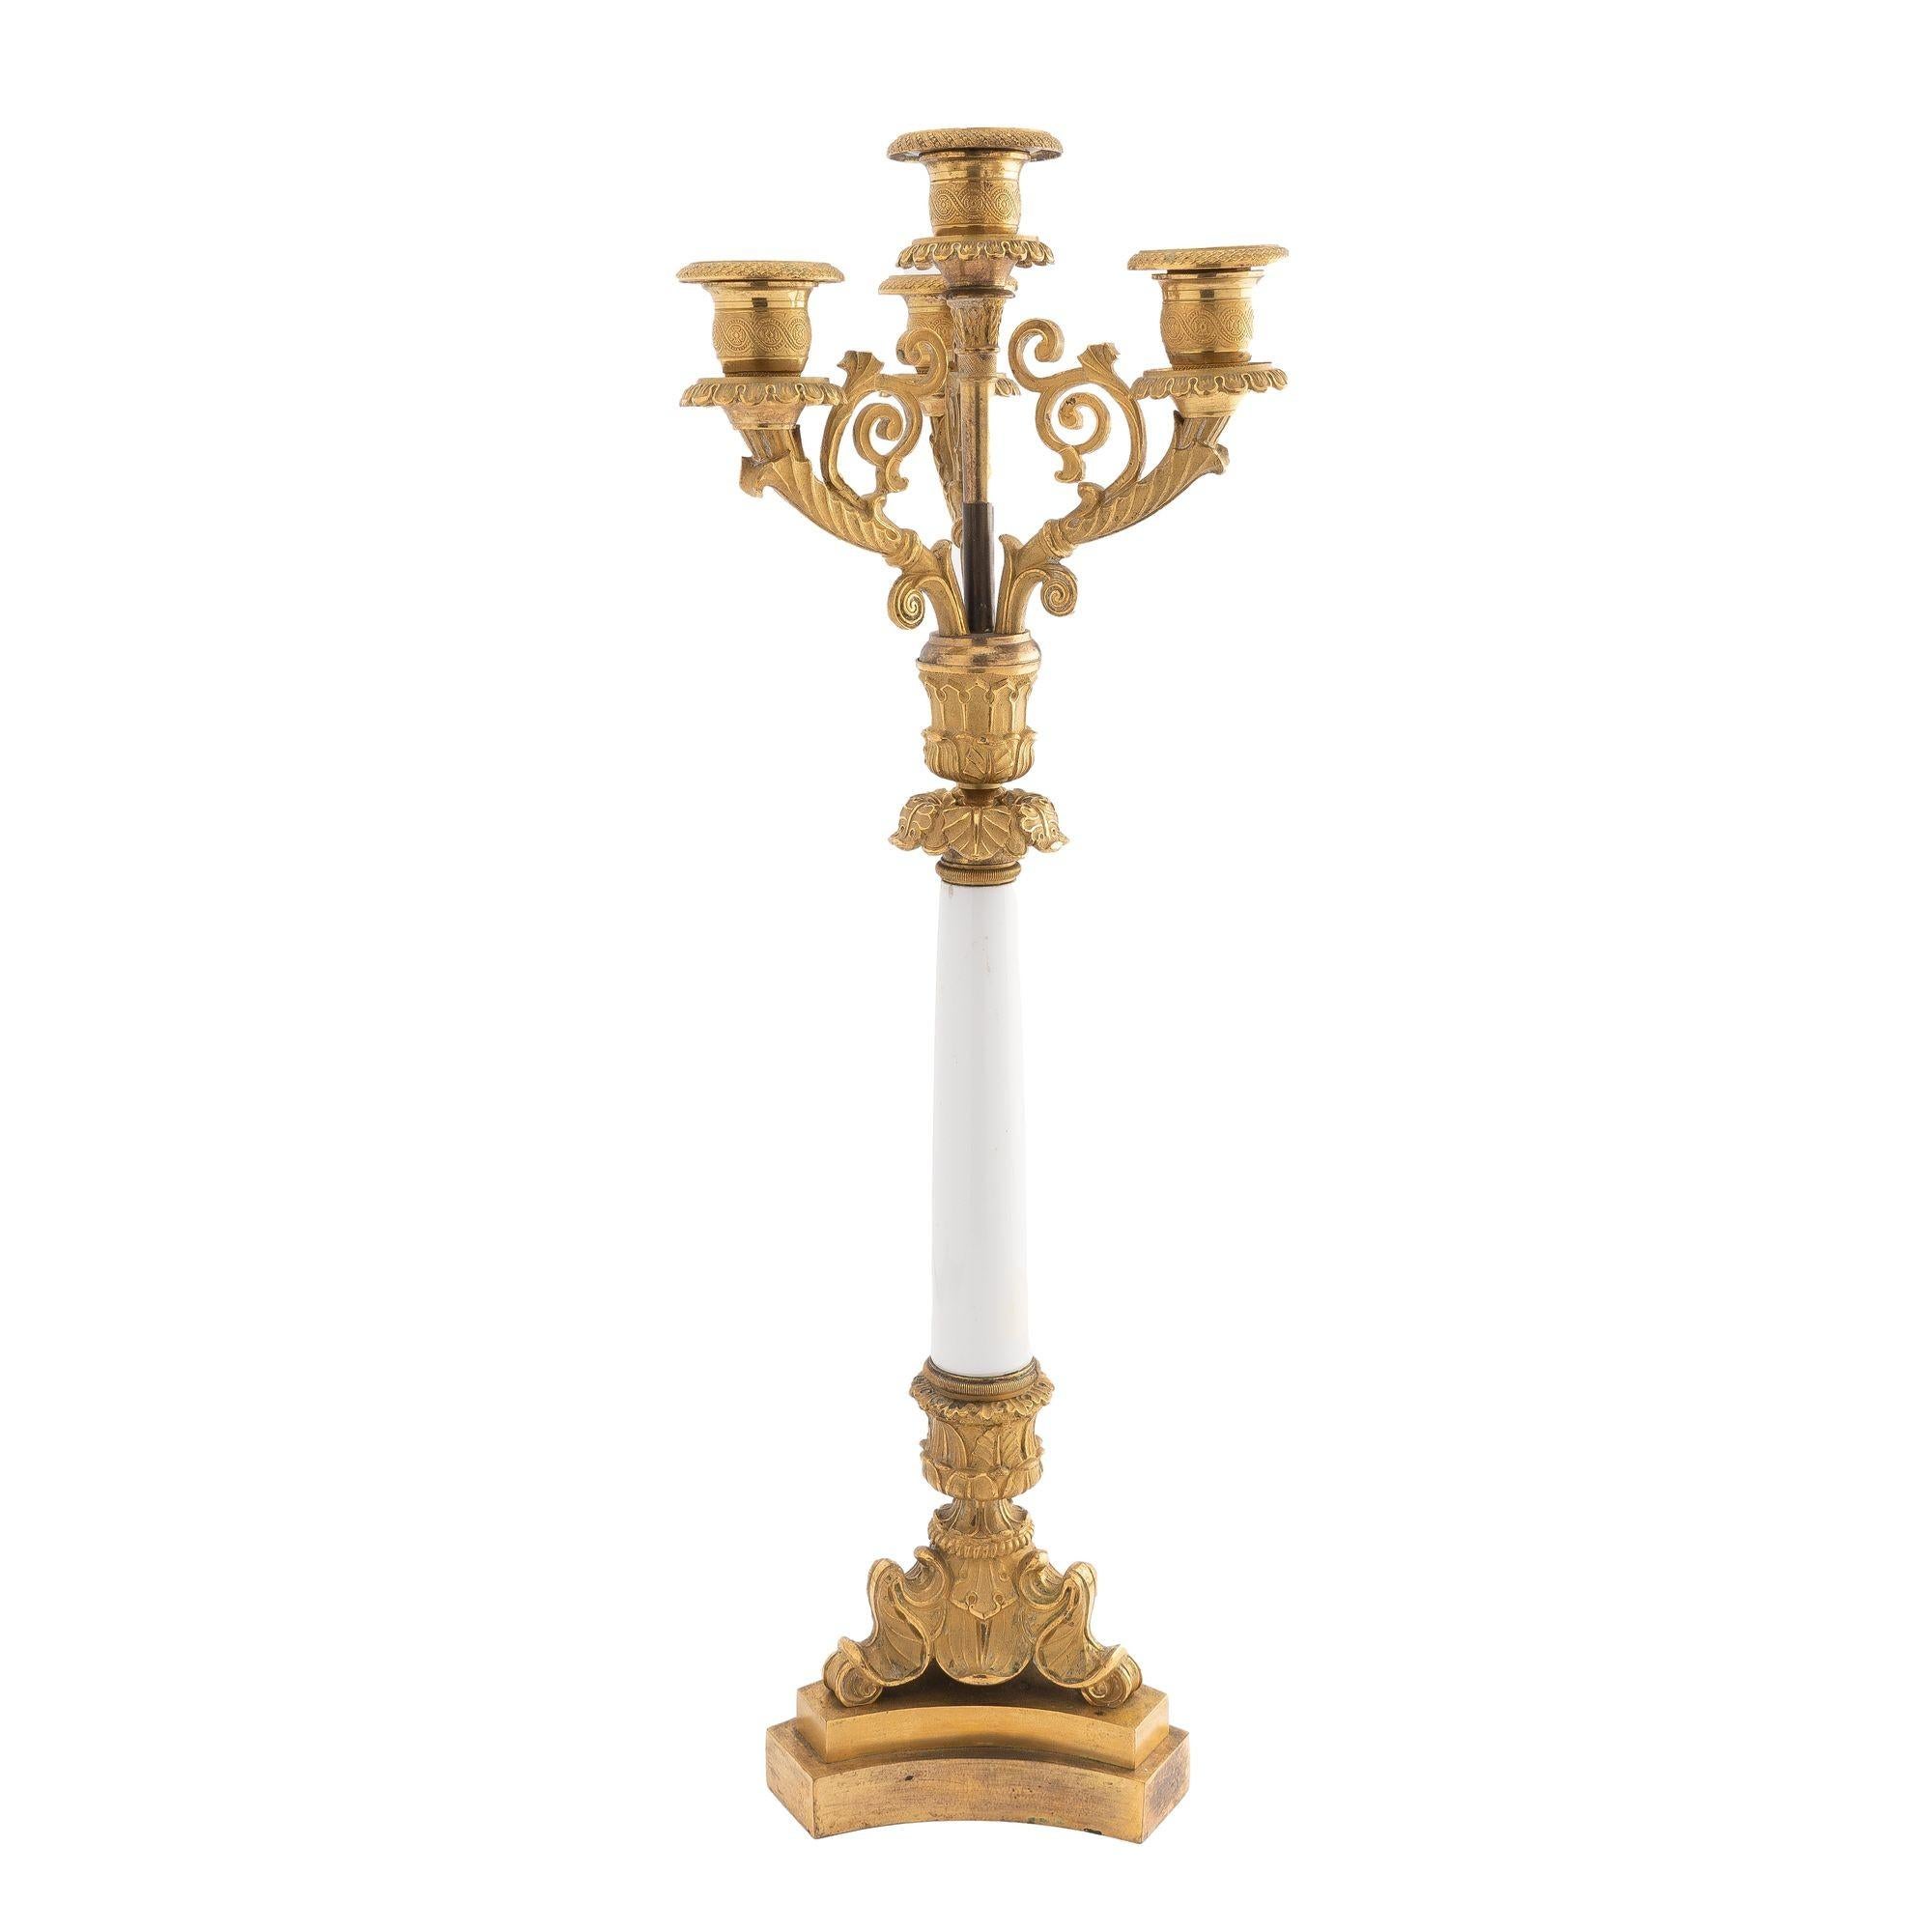 French bronze candelabra with original fire gilt finish. The candelabra has three finely cast scroll arms in the form of a cornucopia, fixed around a central shaft with a candle socket on a white opaline column mounted on a gilt bronze foliate